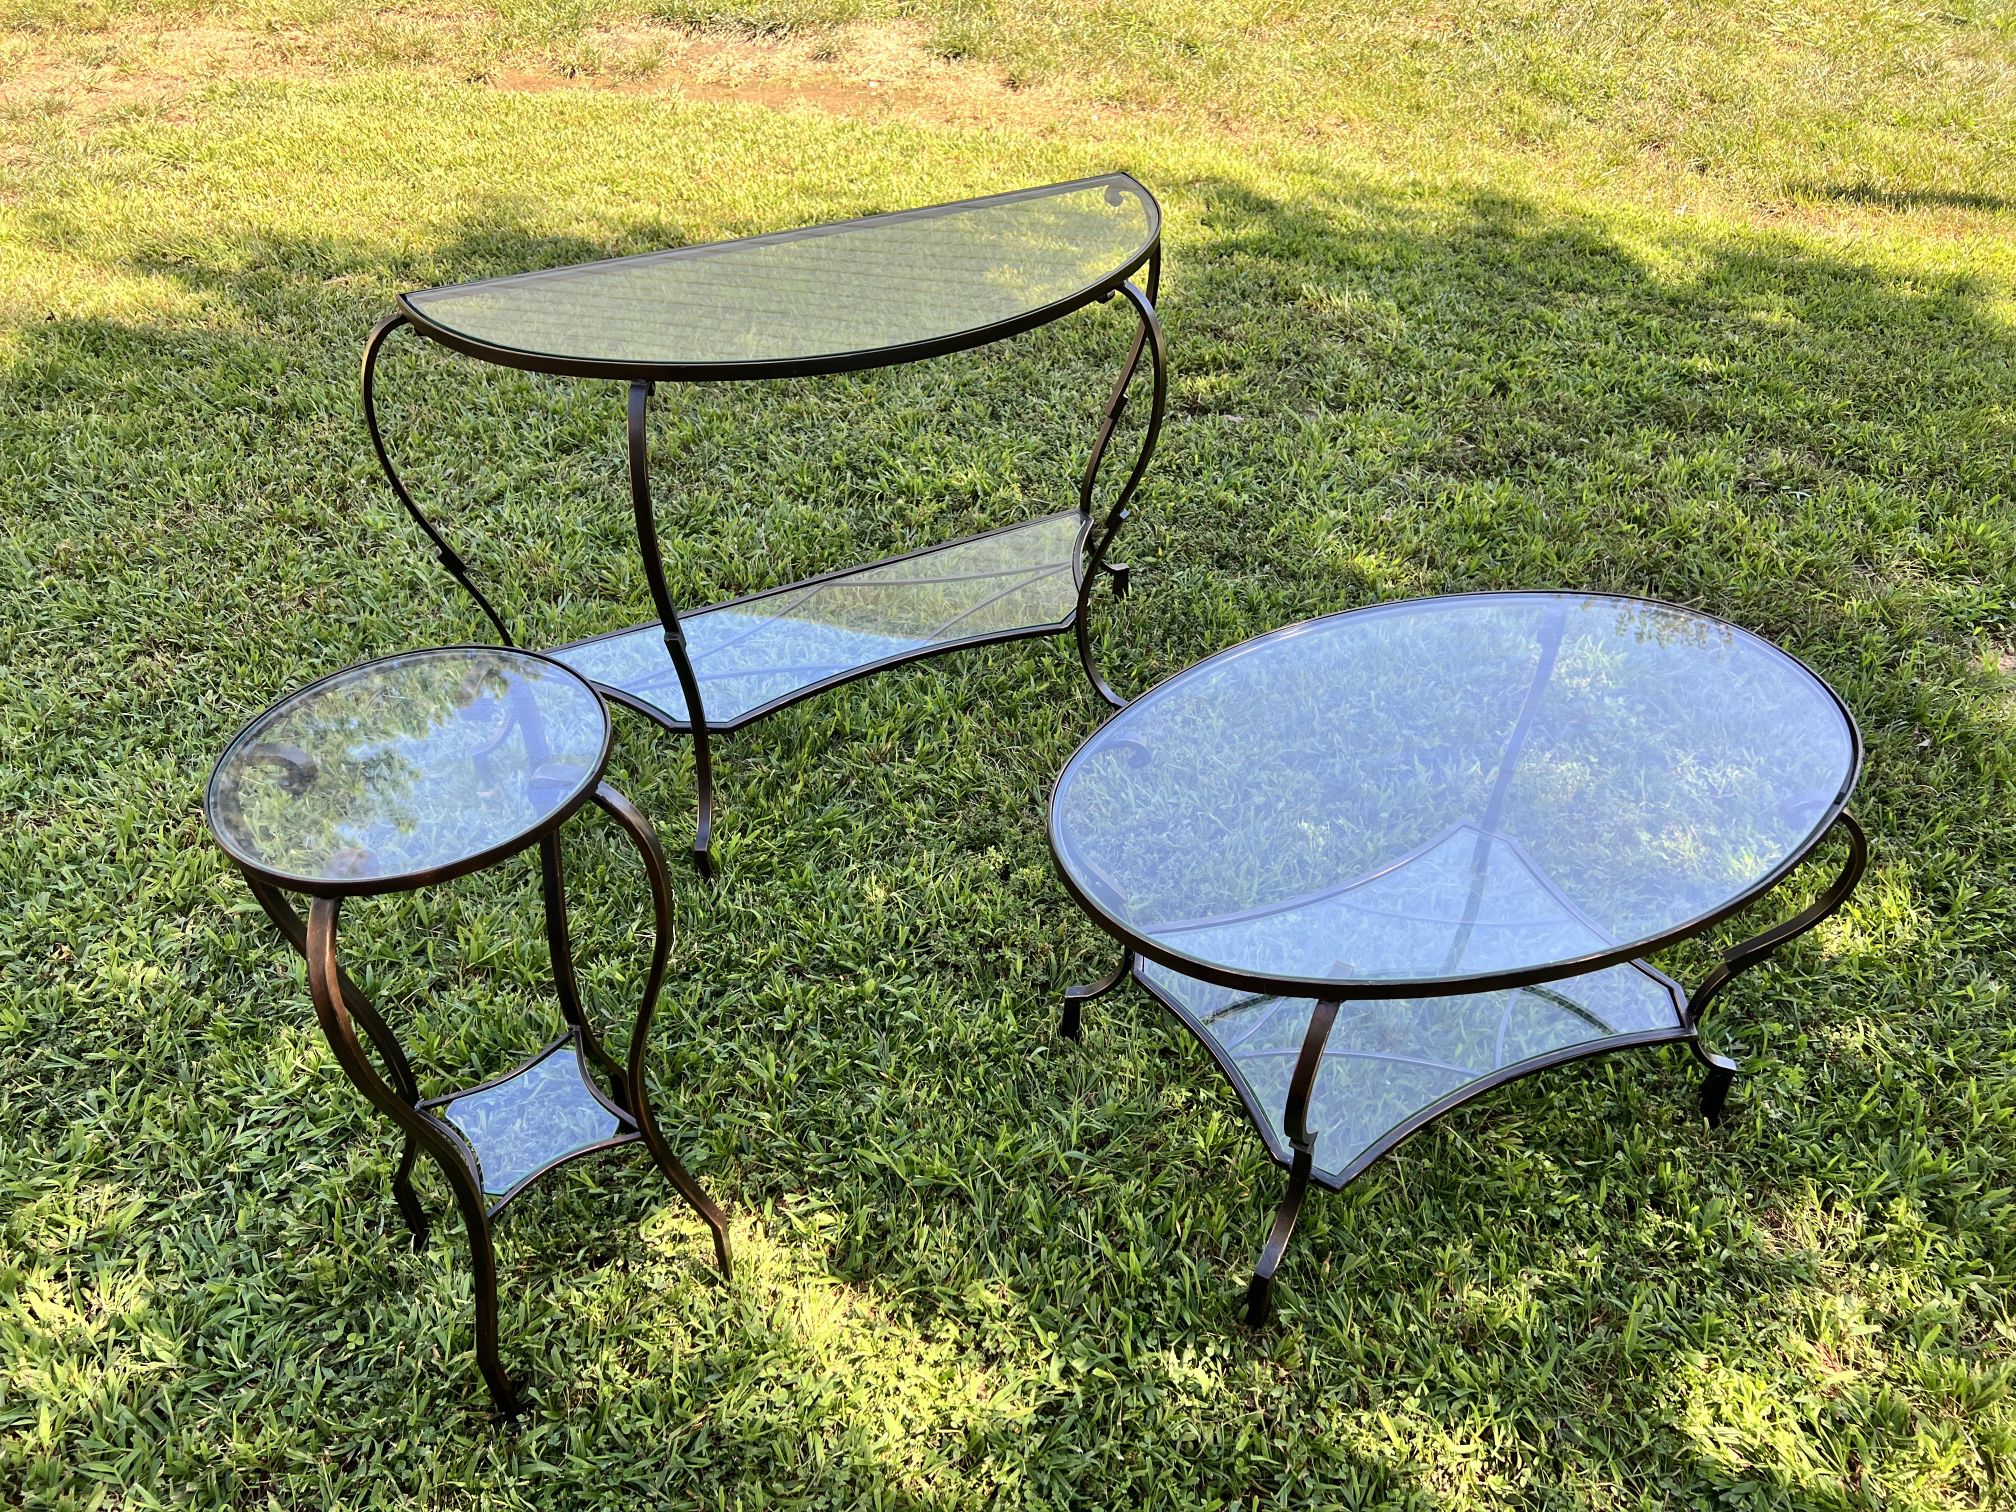 REDUCED PRICE - 3 Pc Glass Coffee Table Set